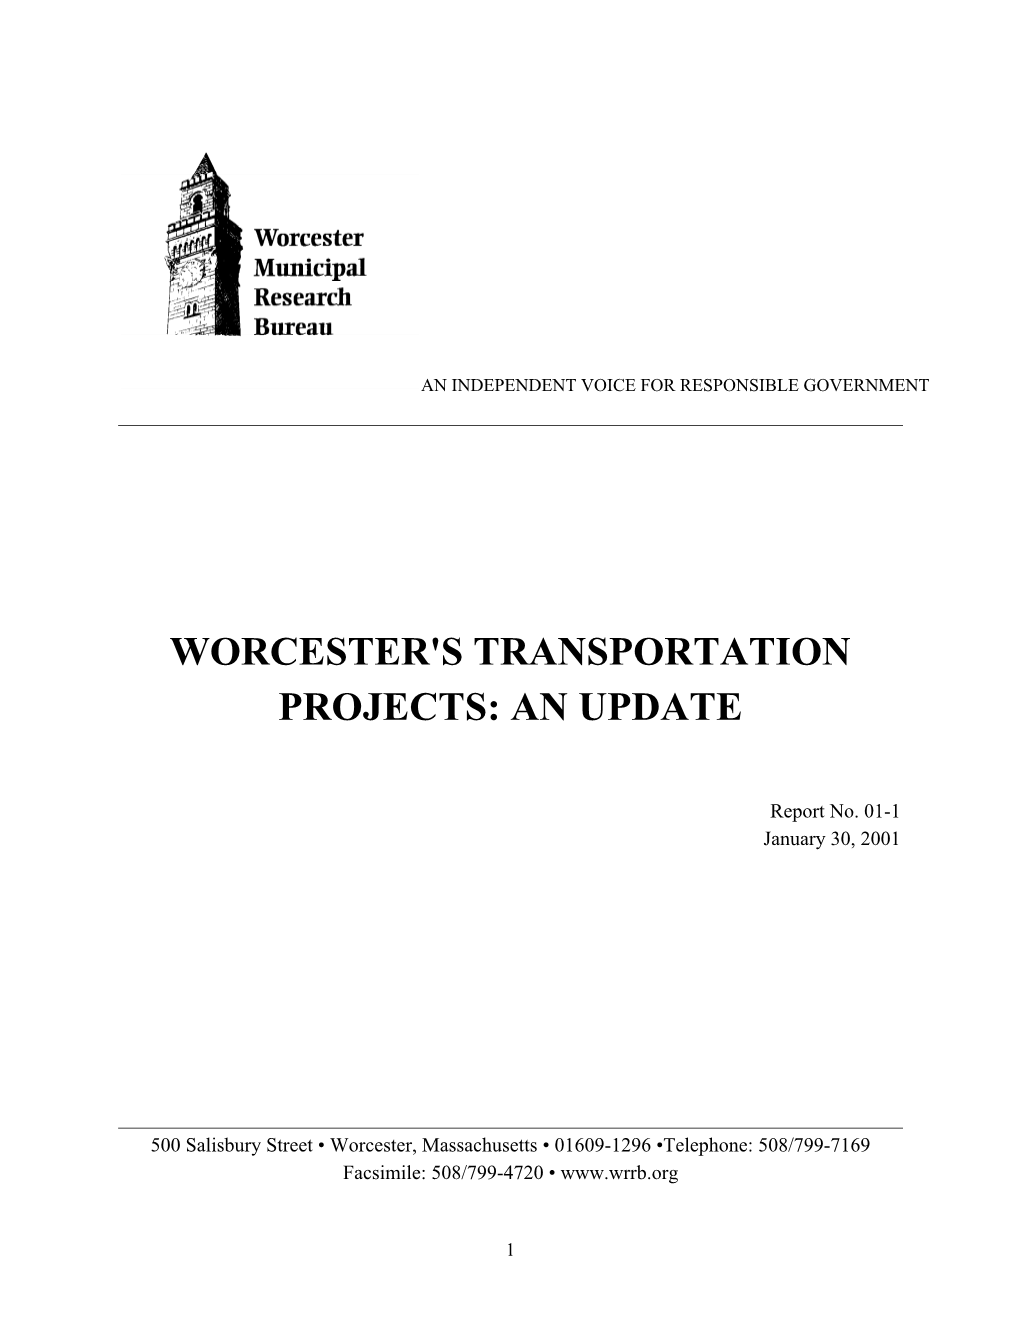 Worcester's Transportation Projects: an Update